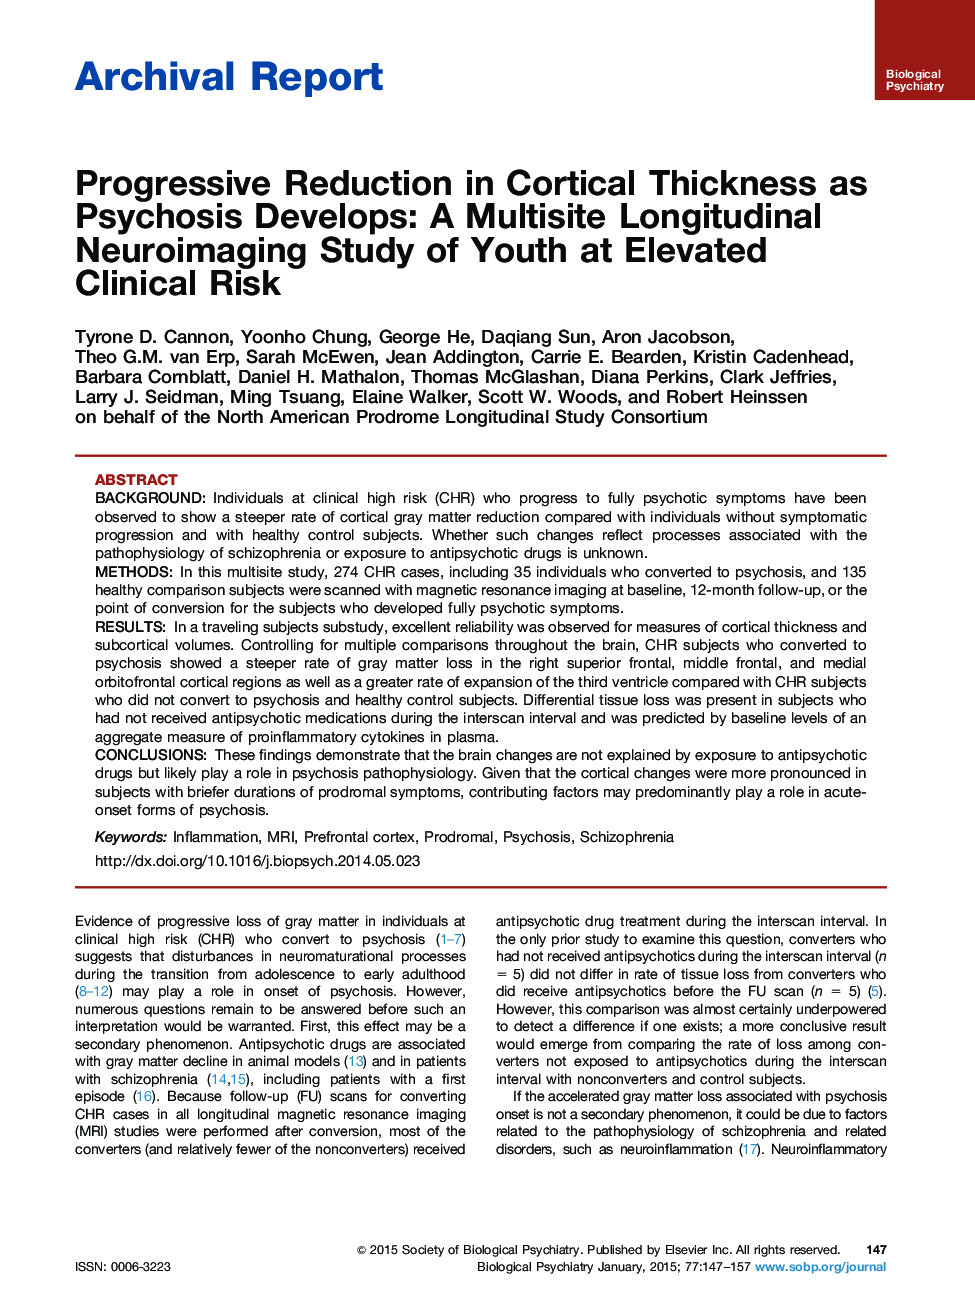 Progressive Reduction in Cortical Thickness as Psychosis Develops: A Multisite Longitudinal Neuroimaging Study of Youth at Elevated Clinical Risk